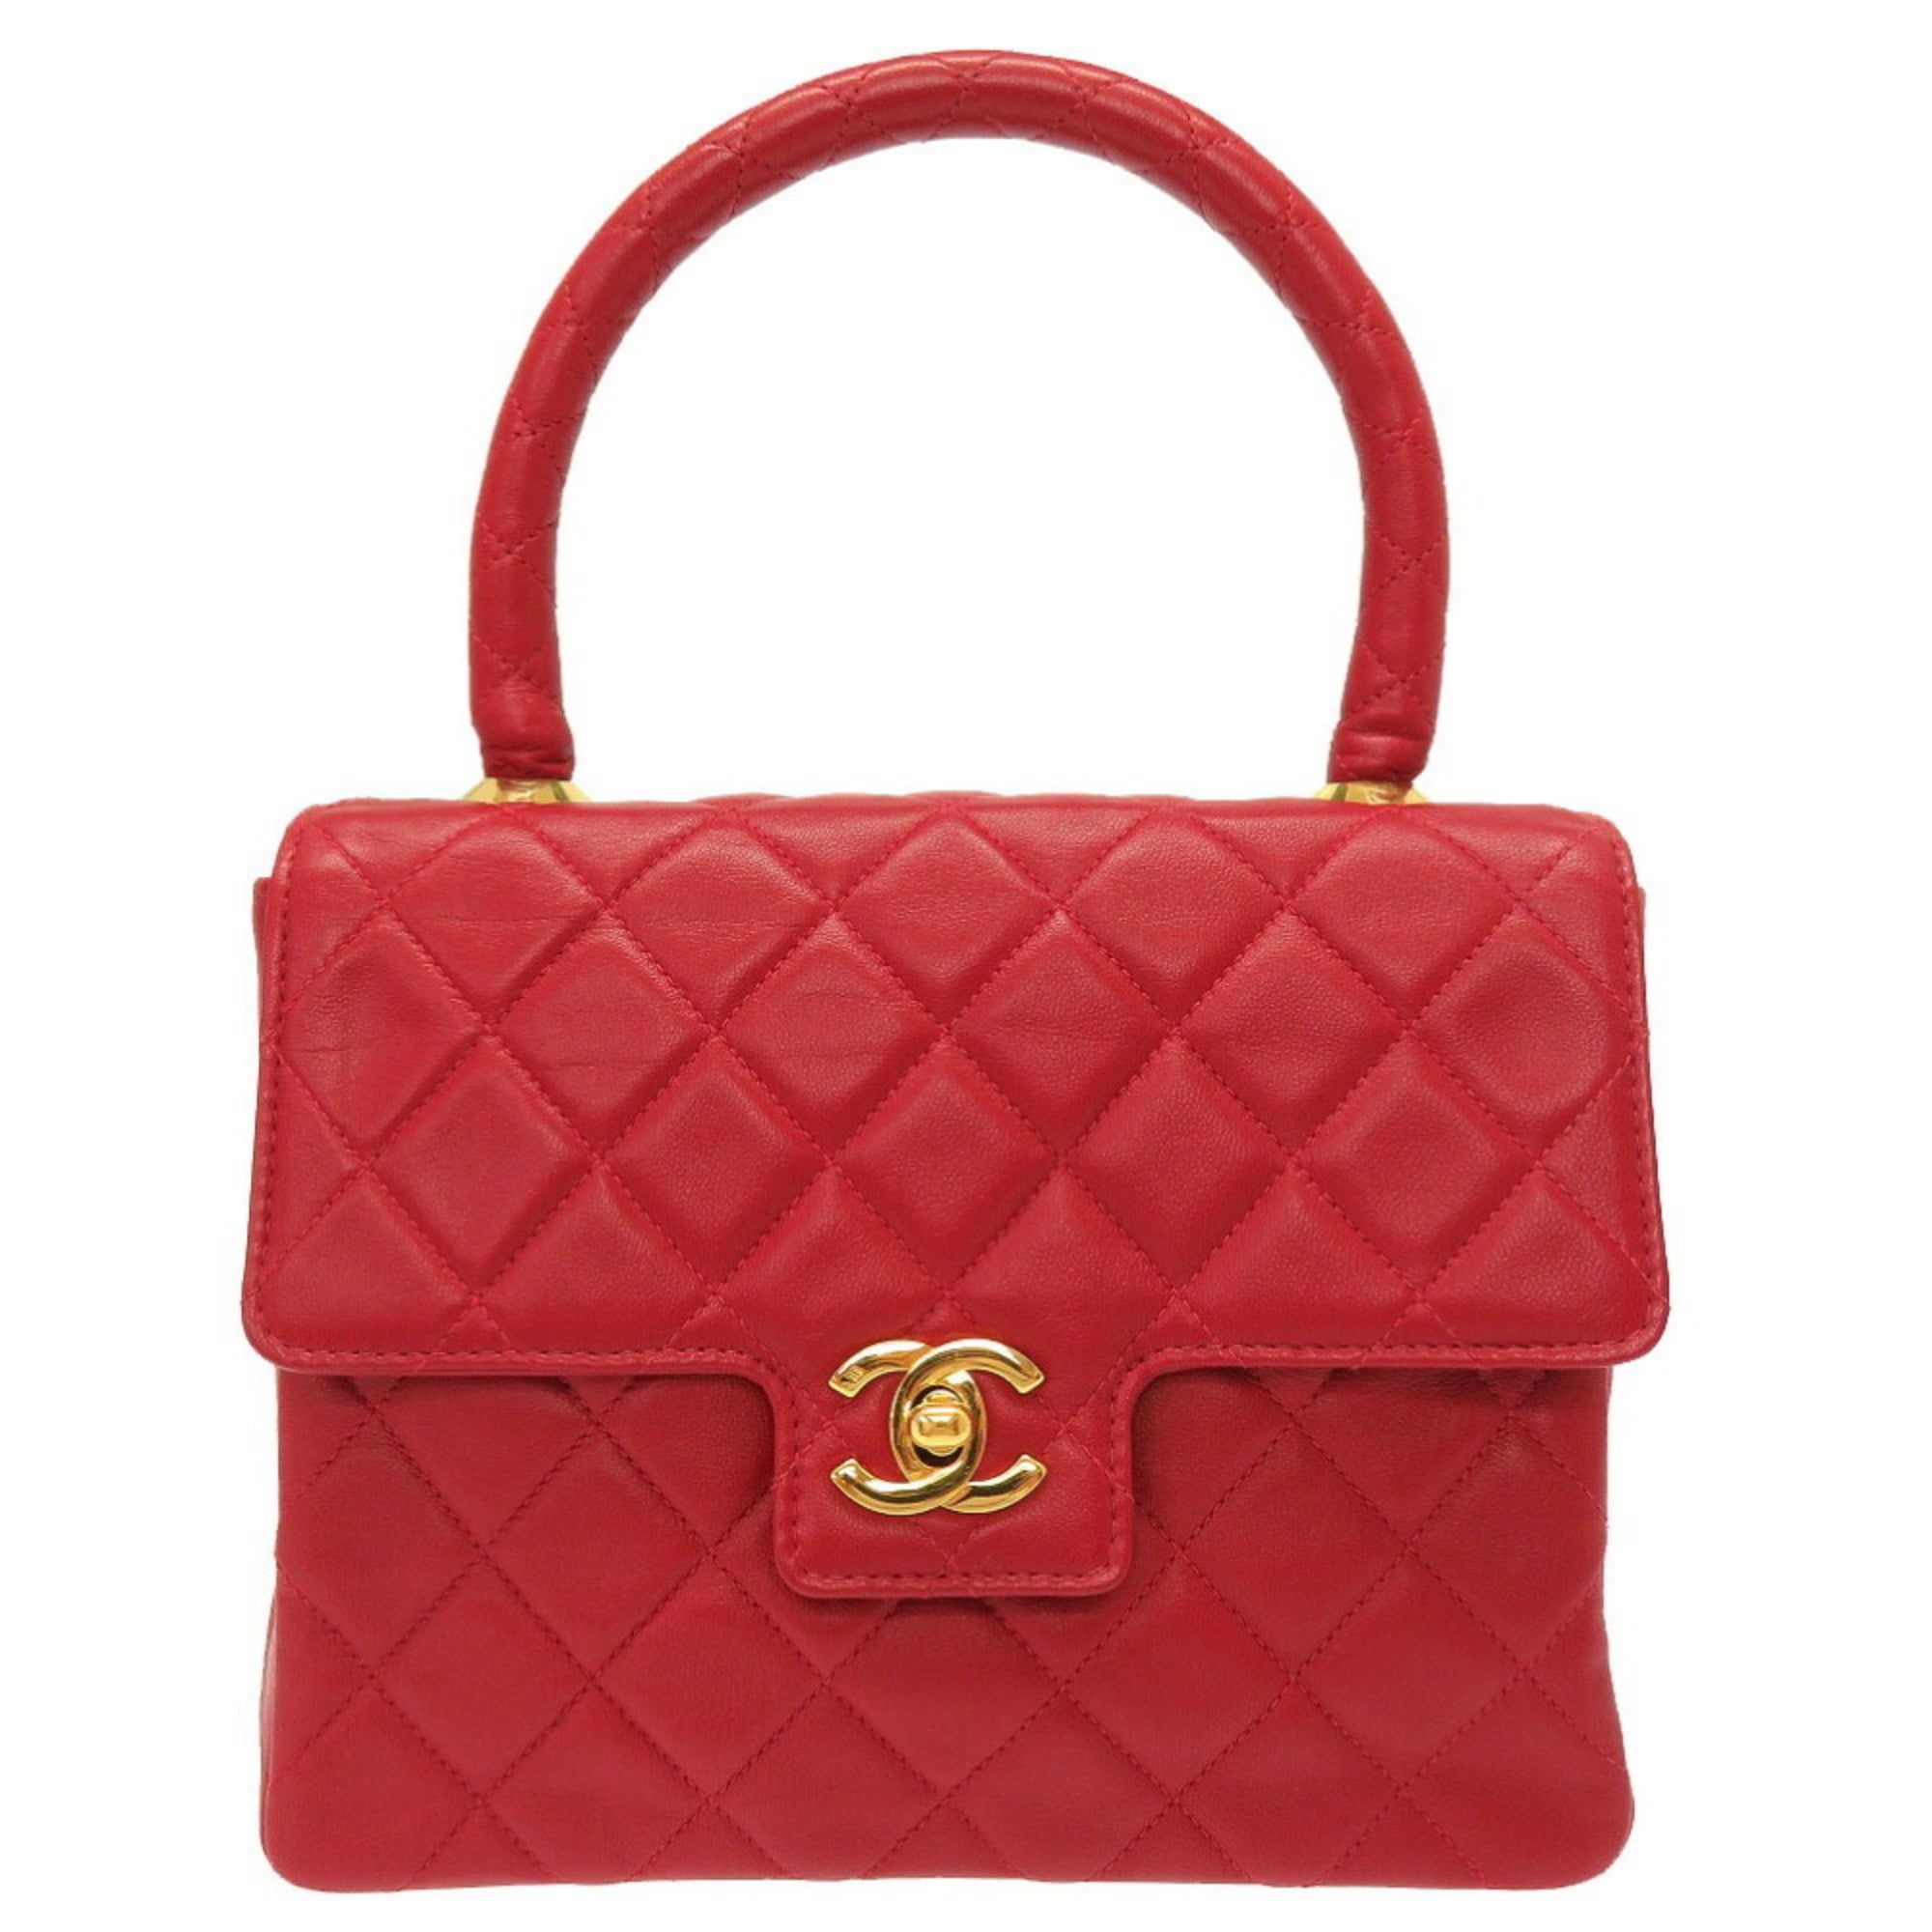 Chanel - Authenticated Handbag - Leather Red for Women, Very Good Condition